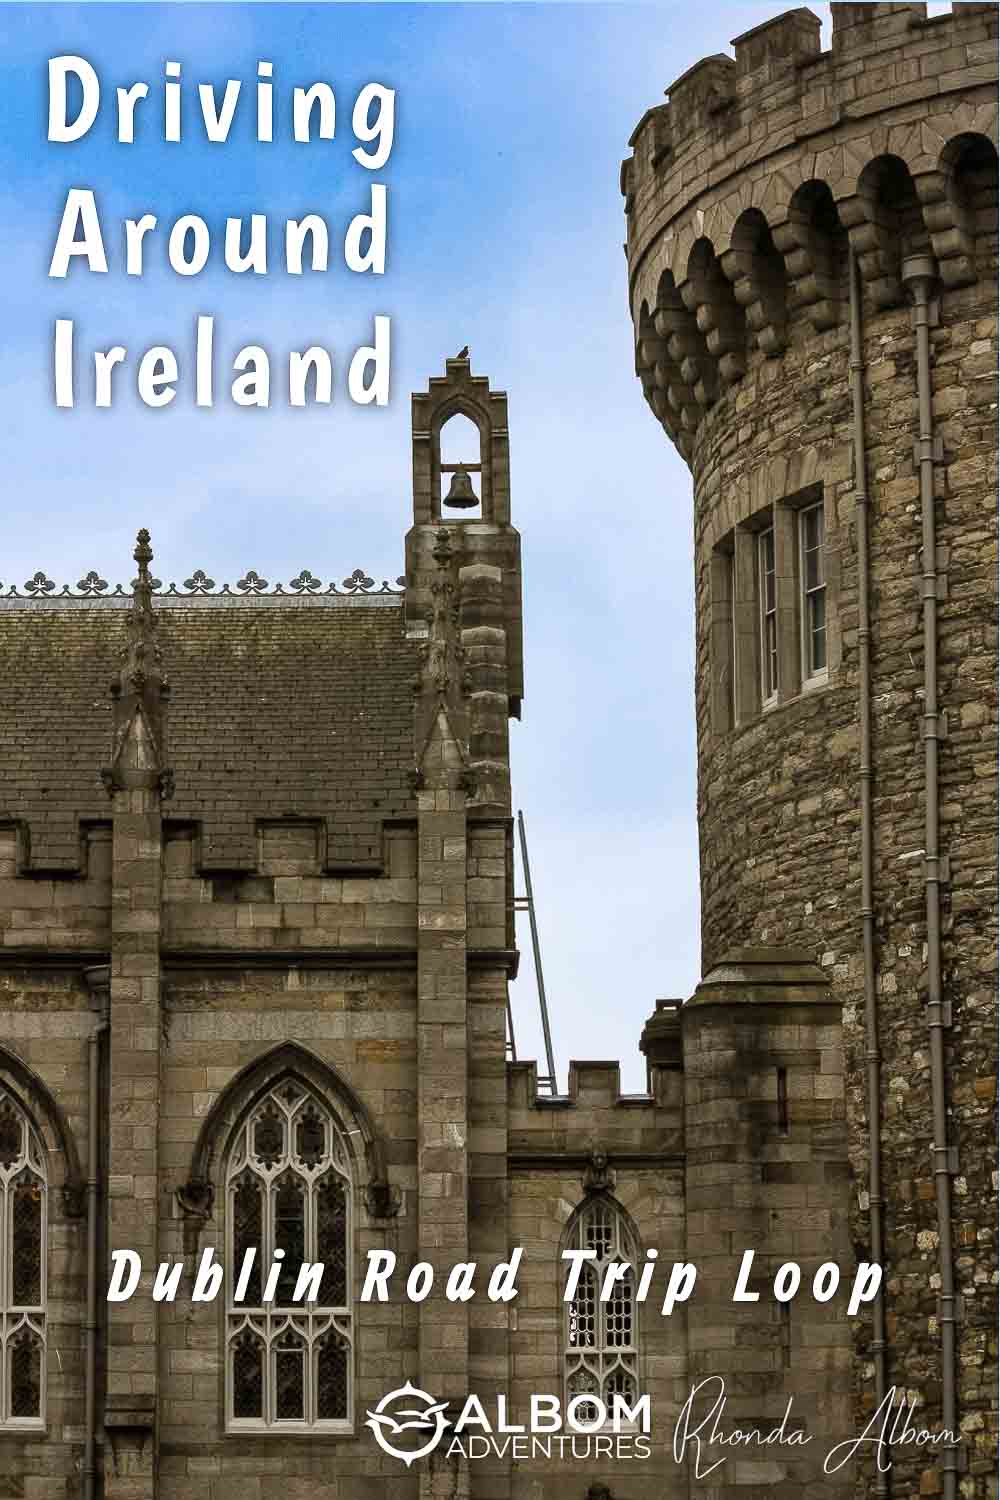 Dublin, and her castle, was our first stop while driving around Ireland. Here's our Irish road trip itinerary, looping from coast to coast.